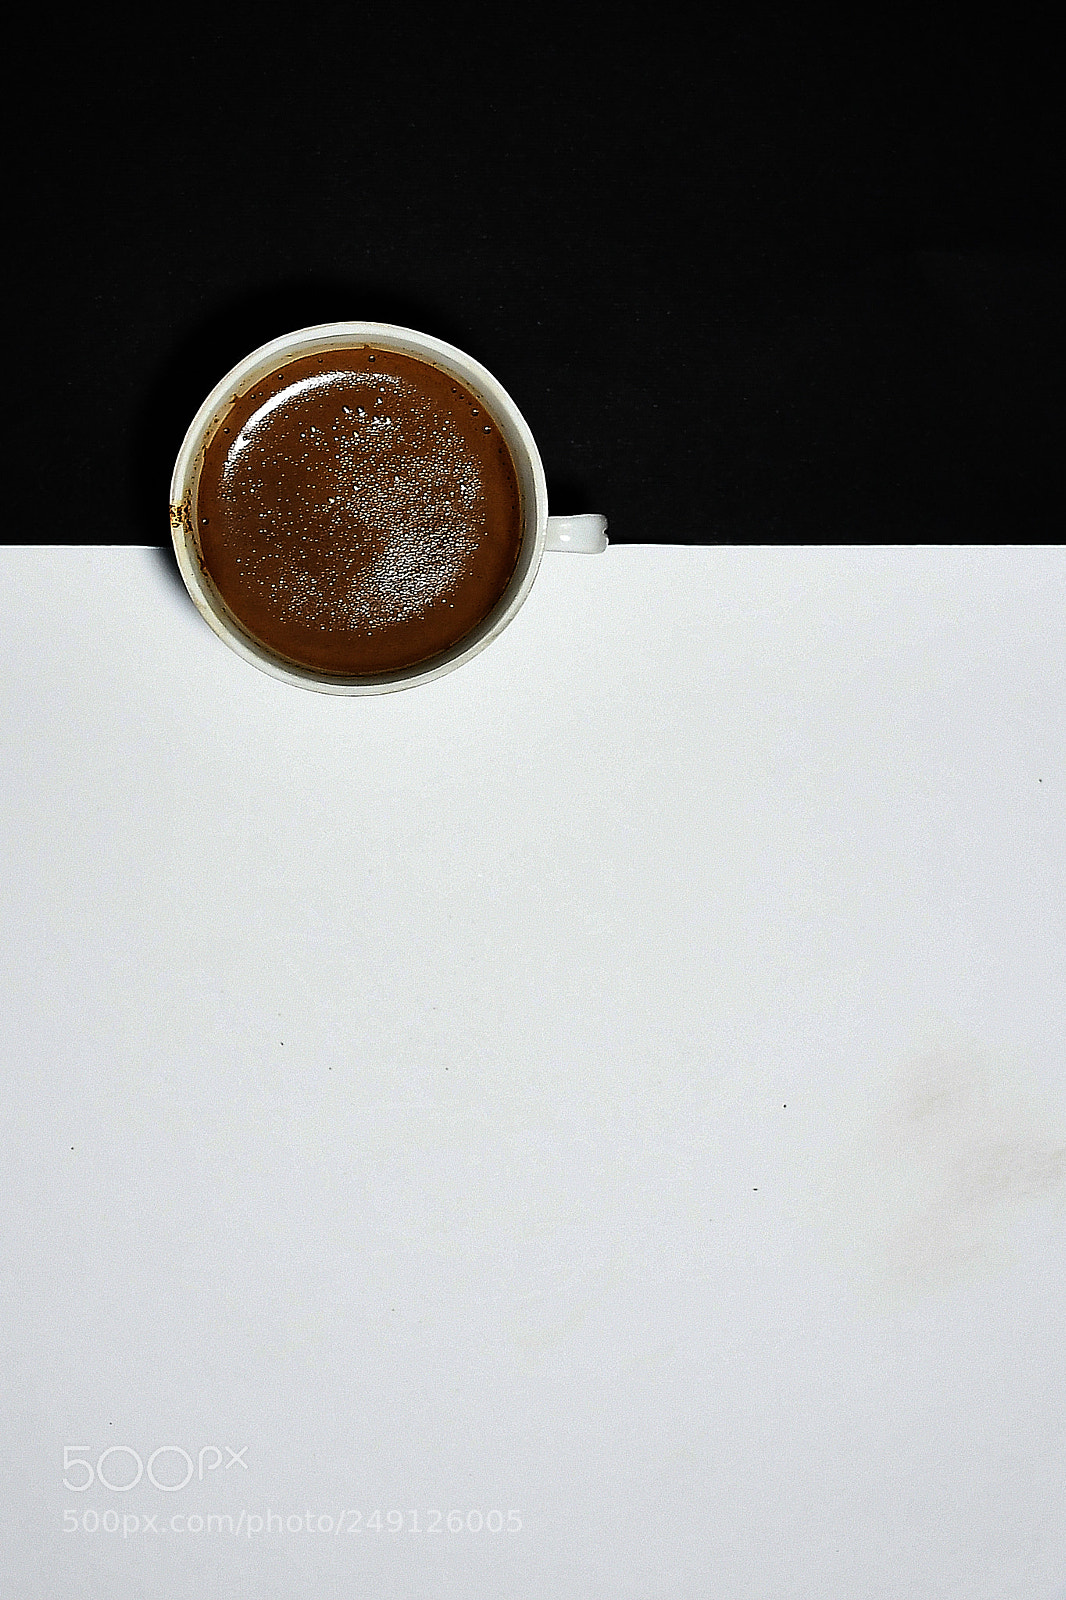 Nikon D500 sample photo. A cup of coffee photography